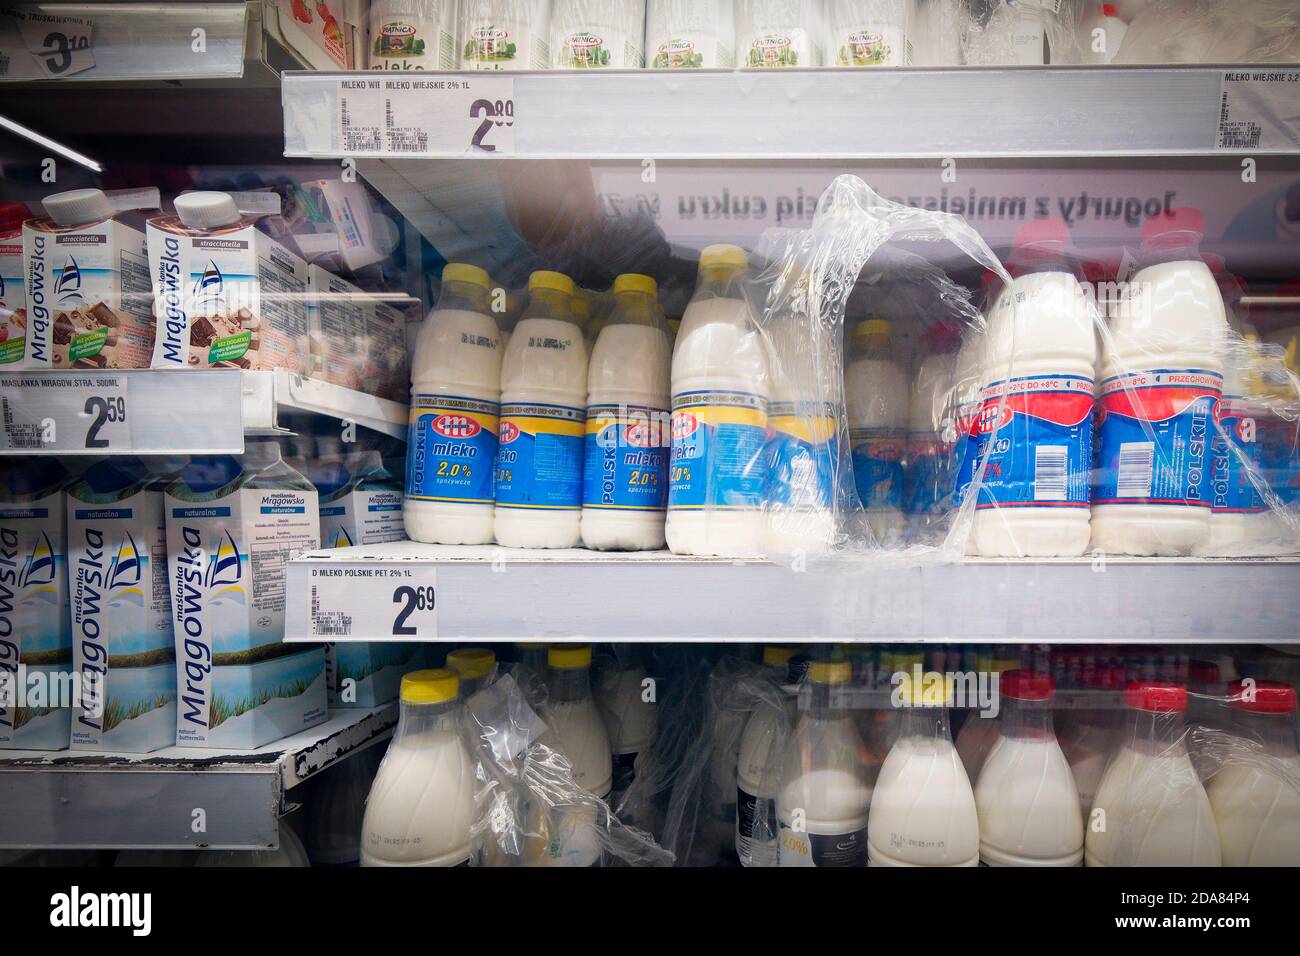 (201110) -- WARSAW, Nov. 10, 2020 (Xinhua) -- Bottles of Mlekovita branded milk are seen on shelves at a supermarket in Warsaw, Poland, Nov. 5, 2020. The European Union (EU) is one of the largest milk suppliers to Chinese market, with Poland accounting for a share of 12.7%, according to Director of Polish Milk Chamber Agnieszka Maliszewska. Statistics from Poland's Ministry of Finance show that, despite the impact of COVID-19, the export of dairy products from Poland to China grew by 70% year on year in the first half of 2020. Recently, batches of Polish dairy products took freight trai Stock Photo